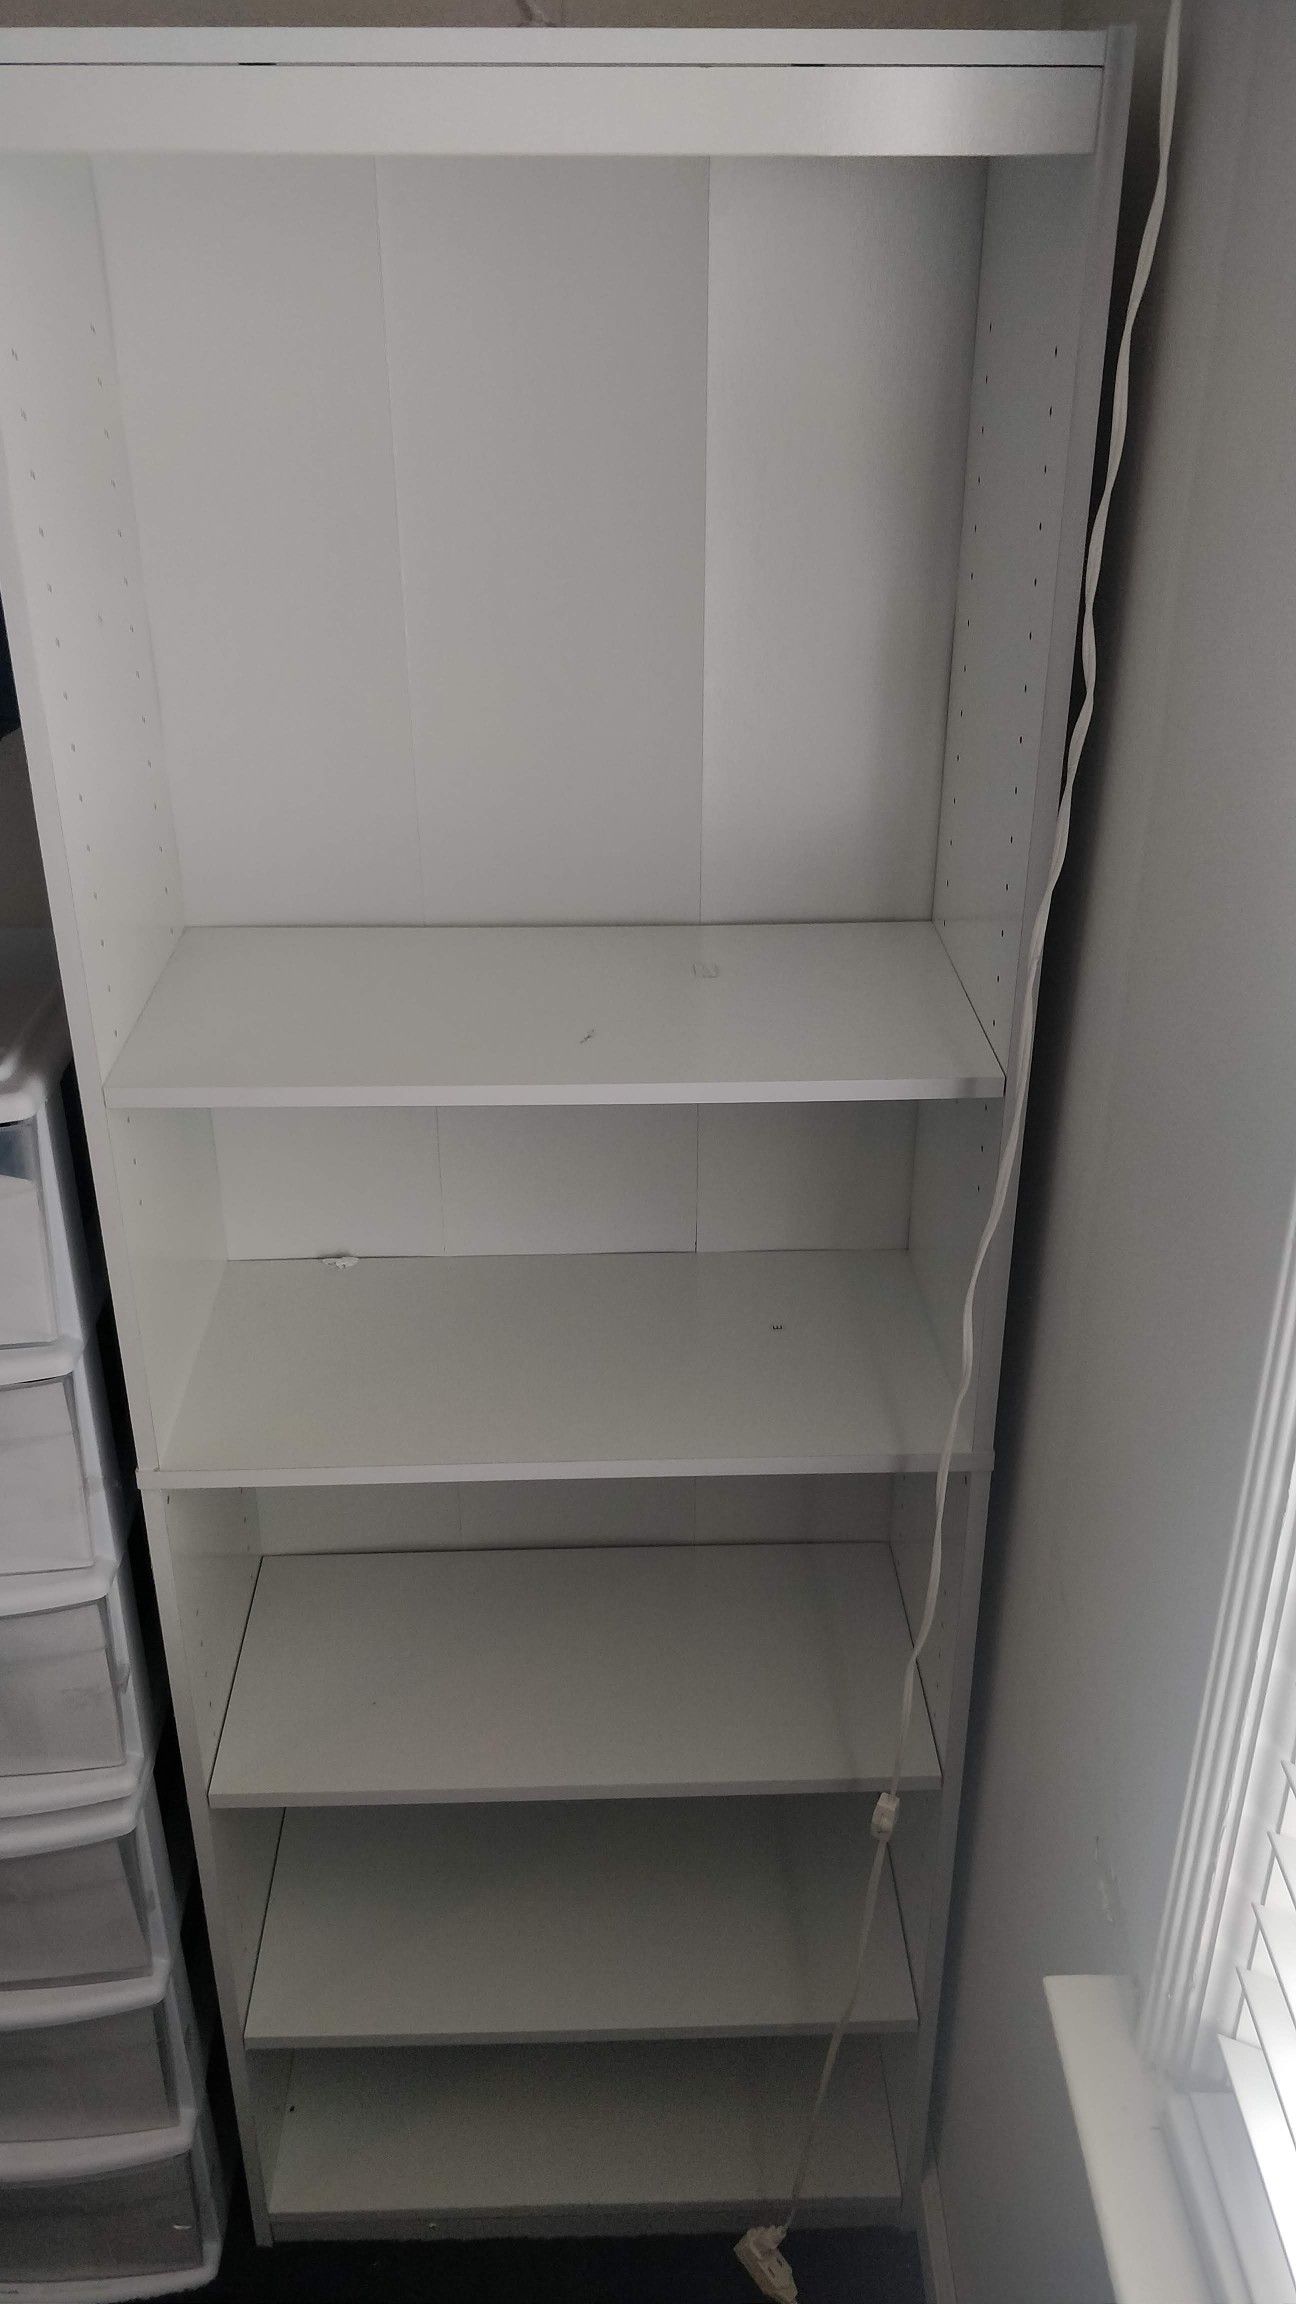 2 large white bookcases